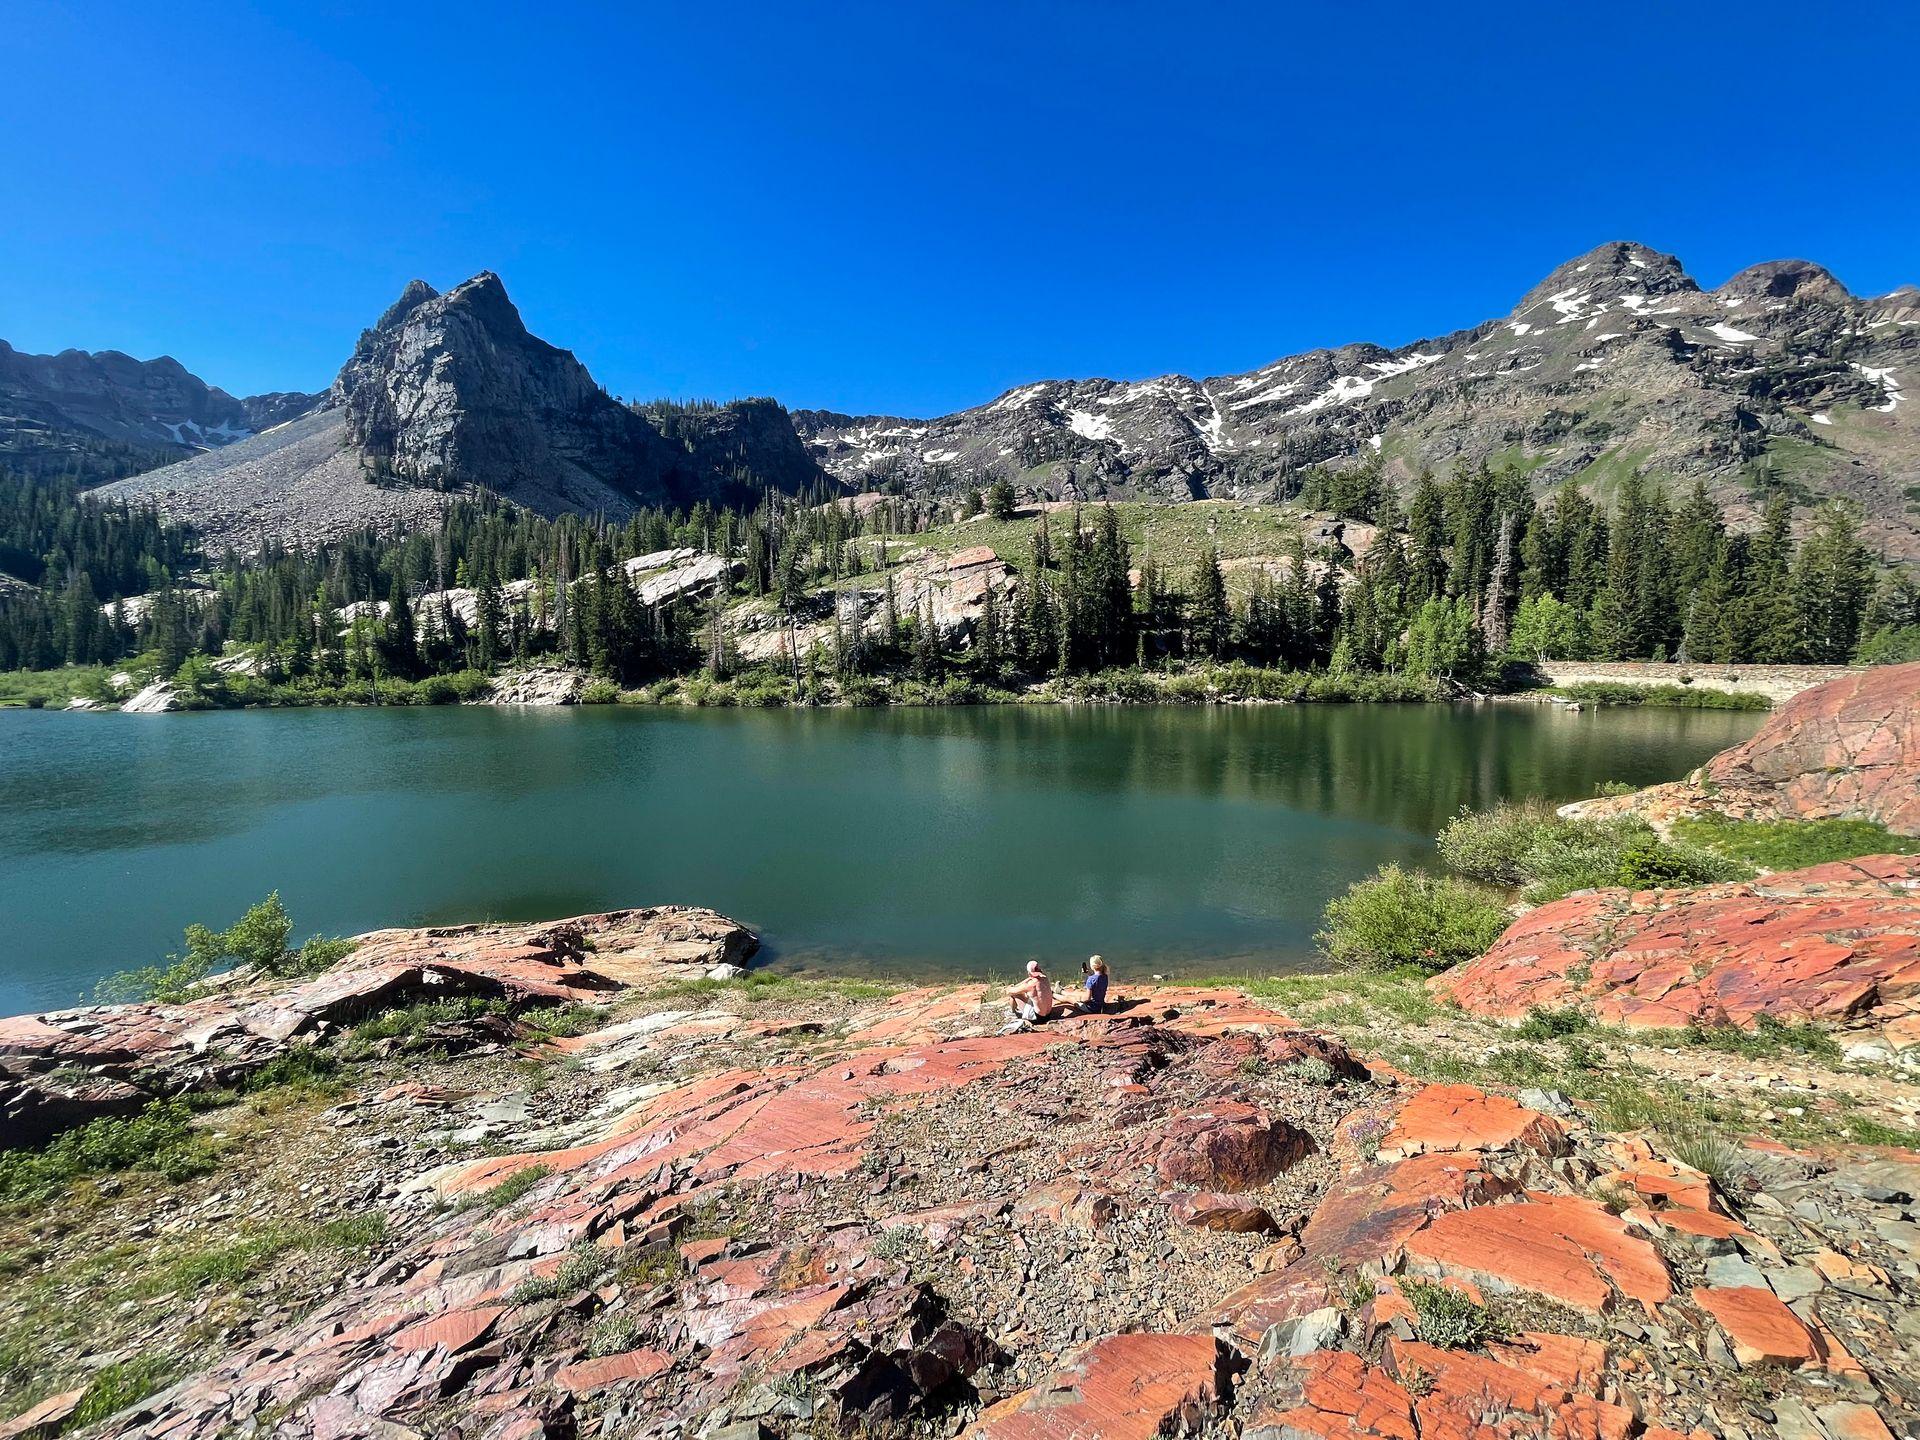 A view of Lake Blanche. Two hikers sit on some red rocks near the lake and a pointy mountain peak is seen on the opposite side of the water.